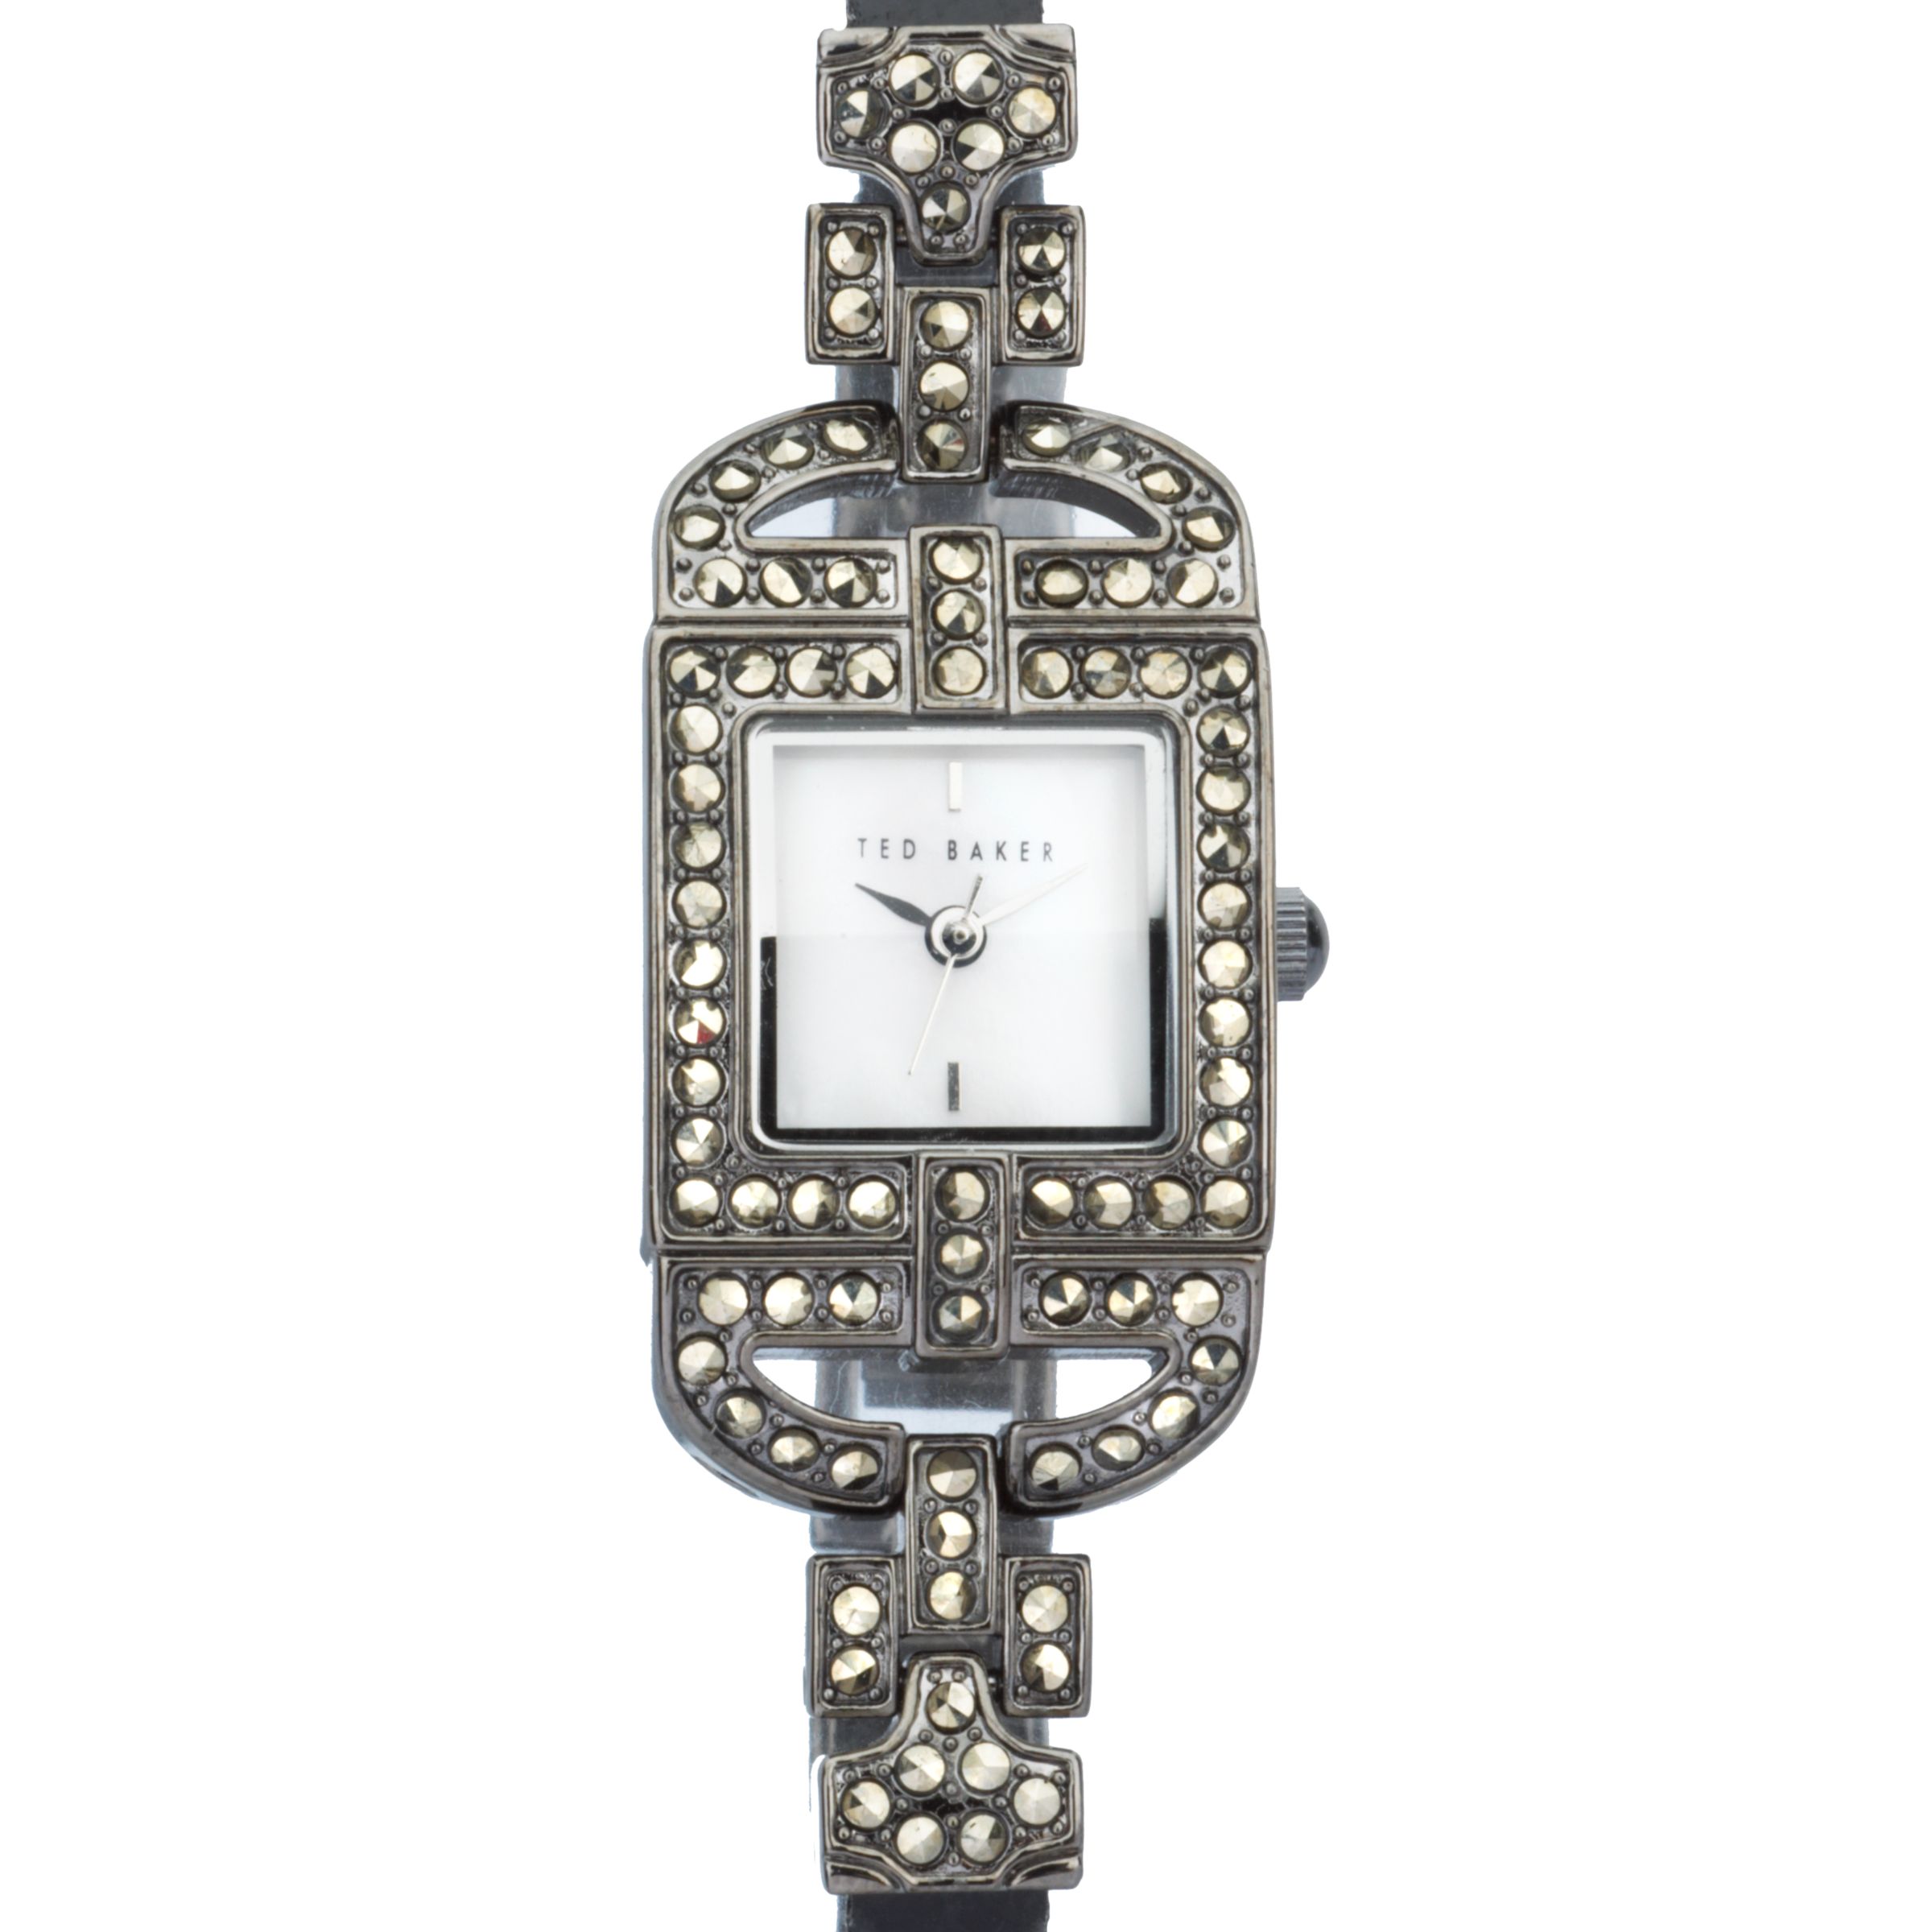 TB275BK Mother of Pearl Dial Watch